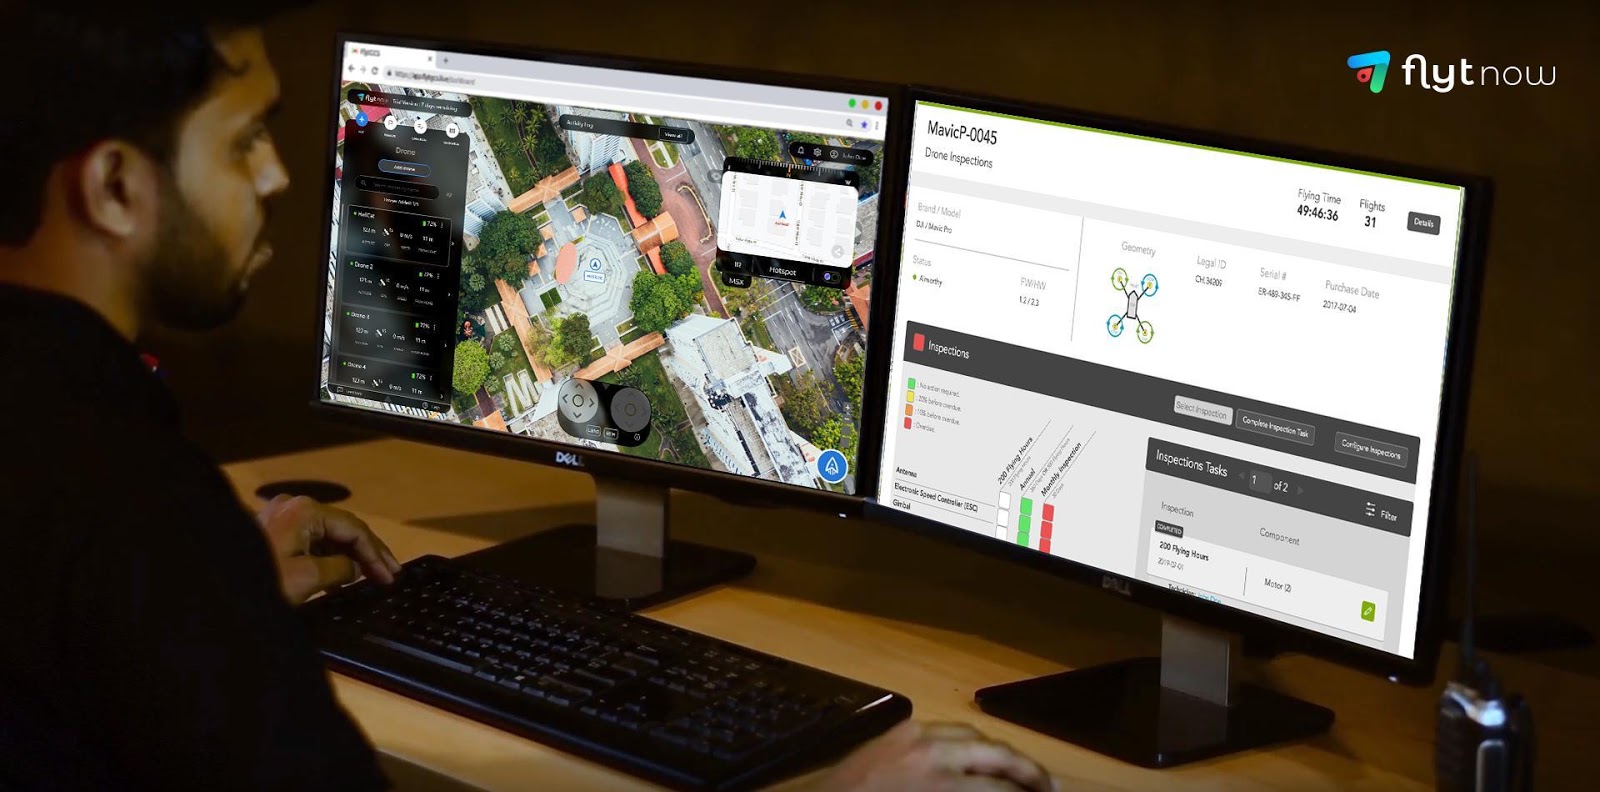 FlytBase and DroneLogBook Partner to  Simplify Live, Remote Drone Operations